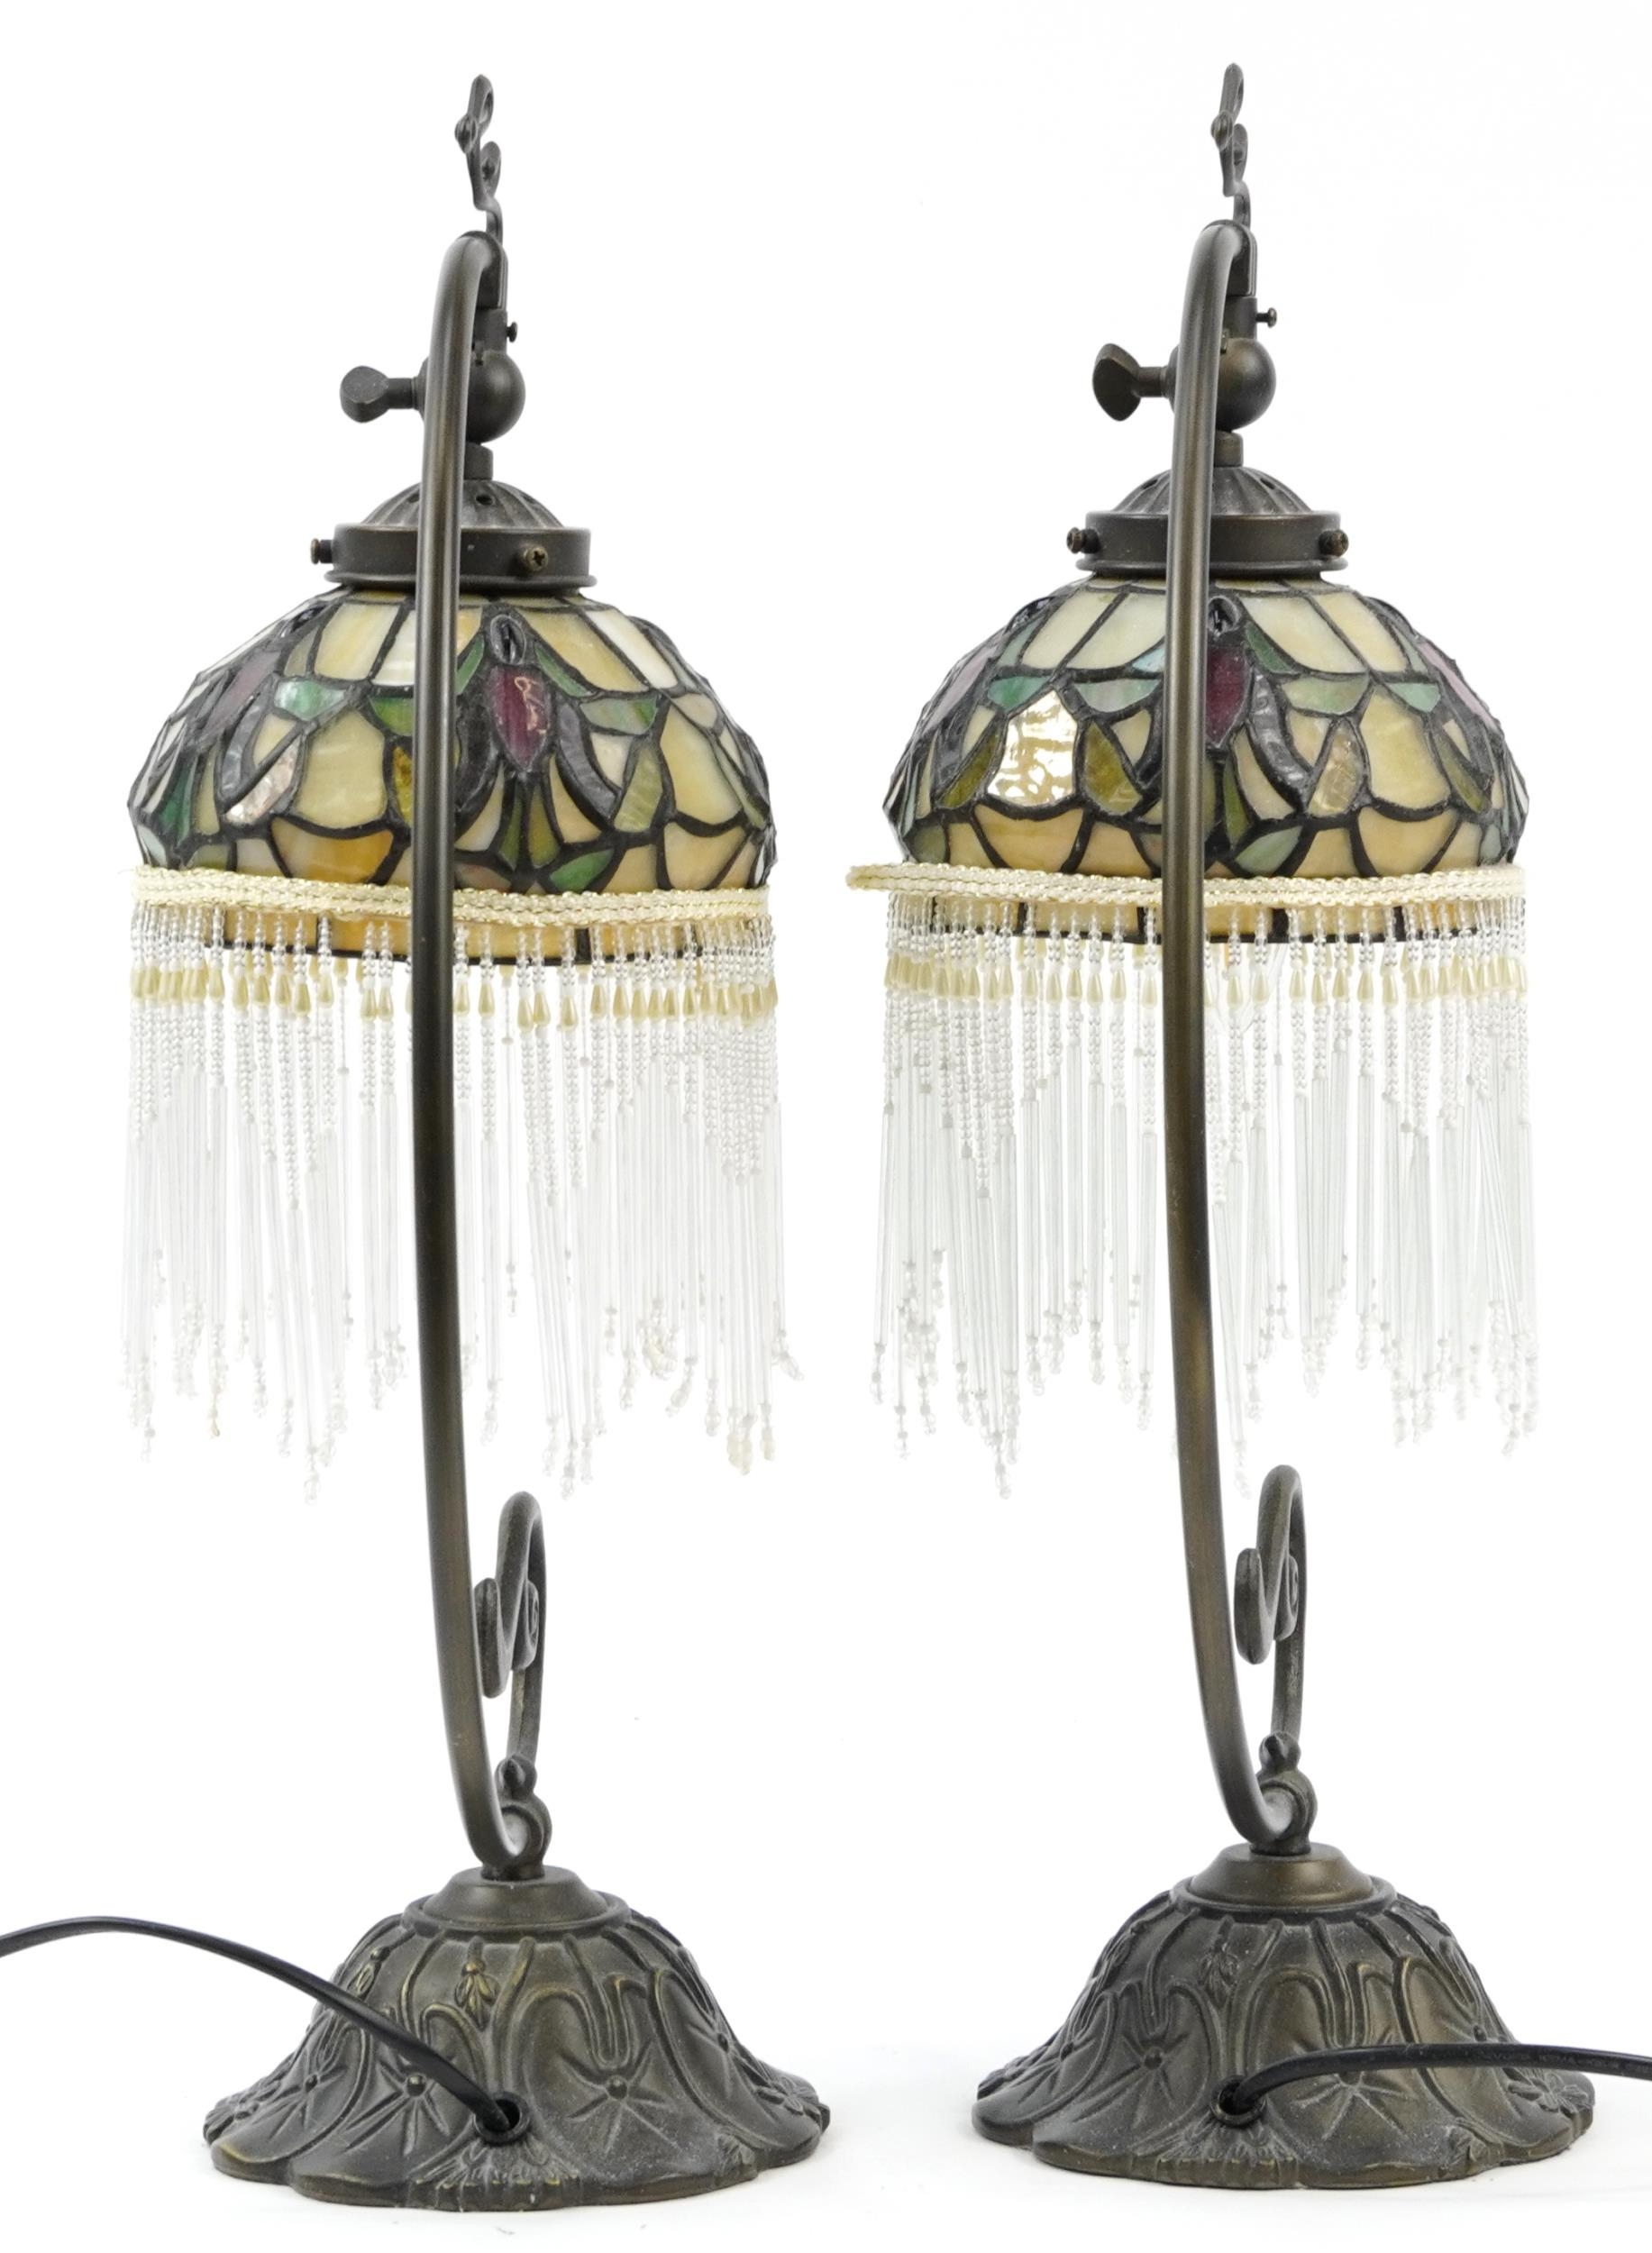 Pair of bronzed Tiffany design table lamps with leaded glass shades and glass drops, 49cm high : For - Image 2 of 4